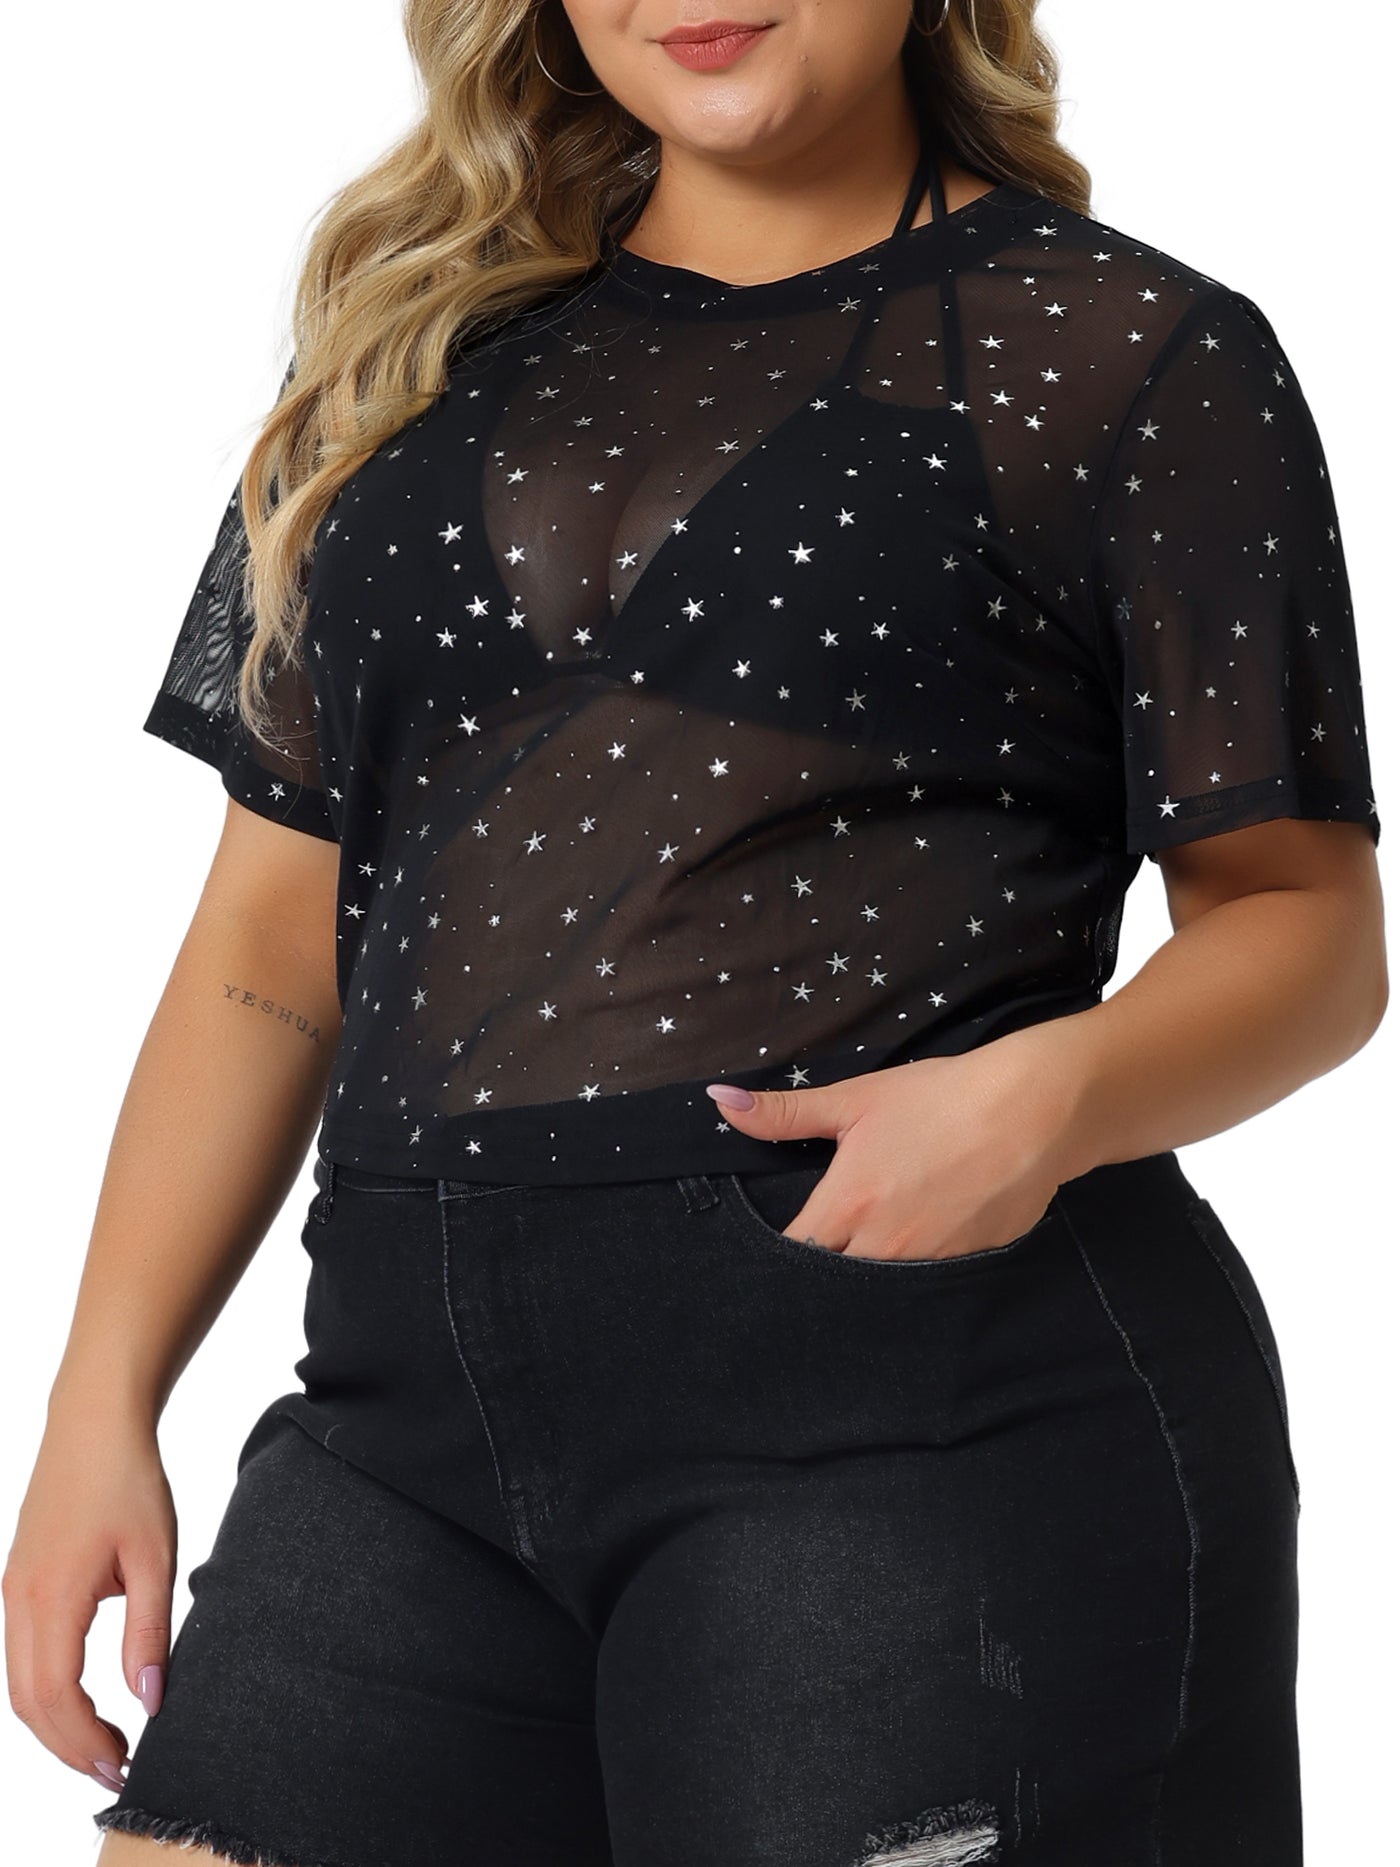 Bublédon Mesh Top for Women Plus Size Silver Star Print Round Neck Short Sleeve Club Sheer Crop Tops